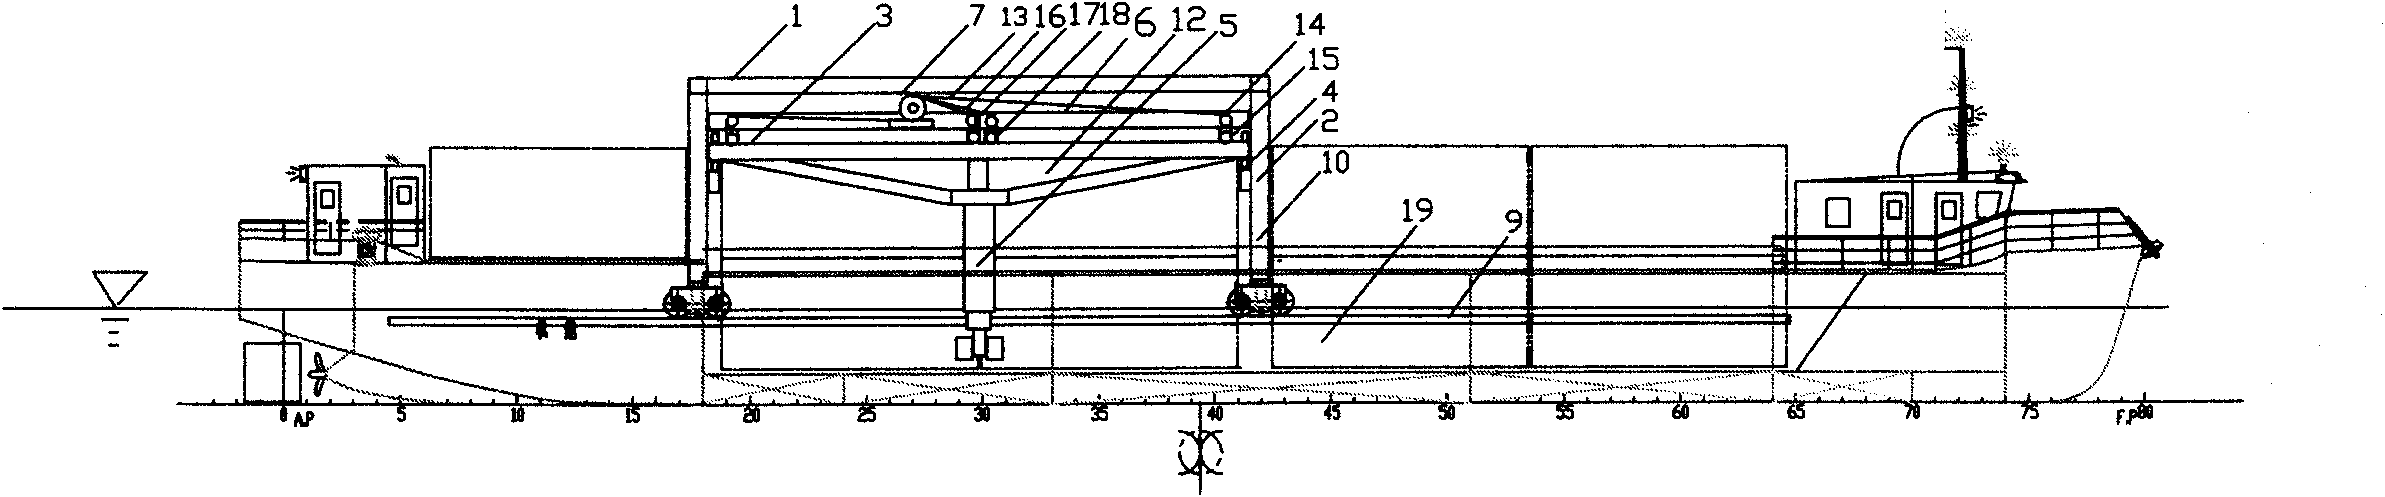 Self-chambering self-discharging container ship